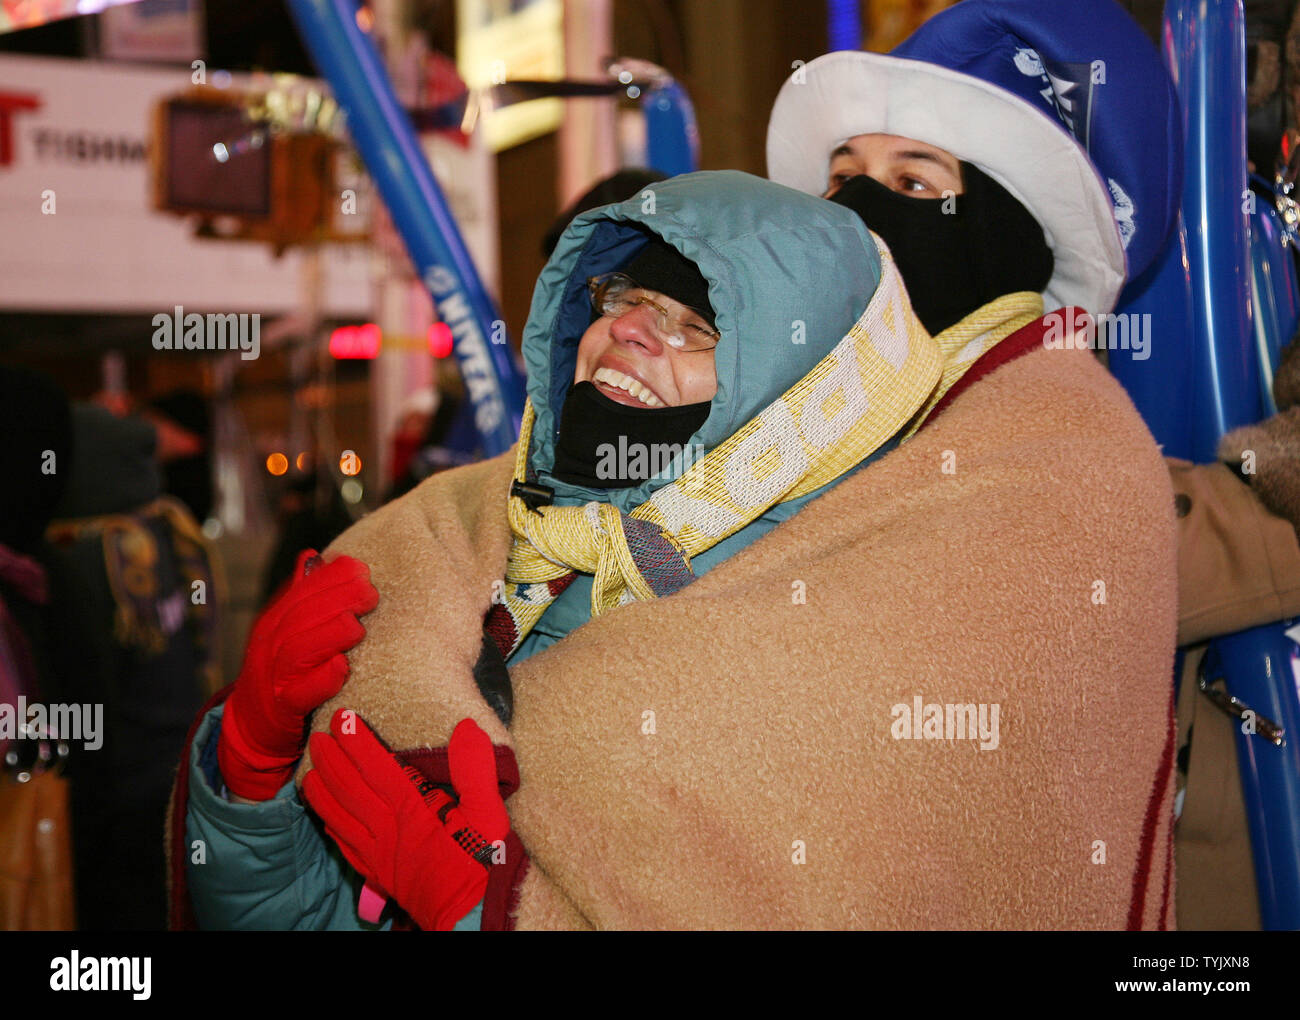 Betty and Lee Plevney of San Francisco huddle to keep warm as they join the thousands of  of revelers gathered in Times Square in sub-freezing temperatures as they celebrate New Year's Eve on December 31, 2008 in New York City. (UPI Photo/Monika Graff) Stock Photo